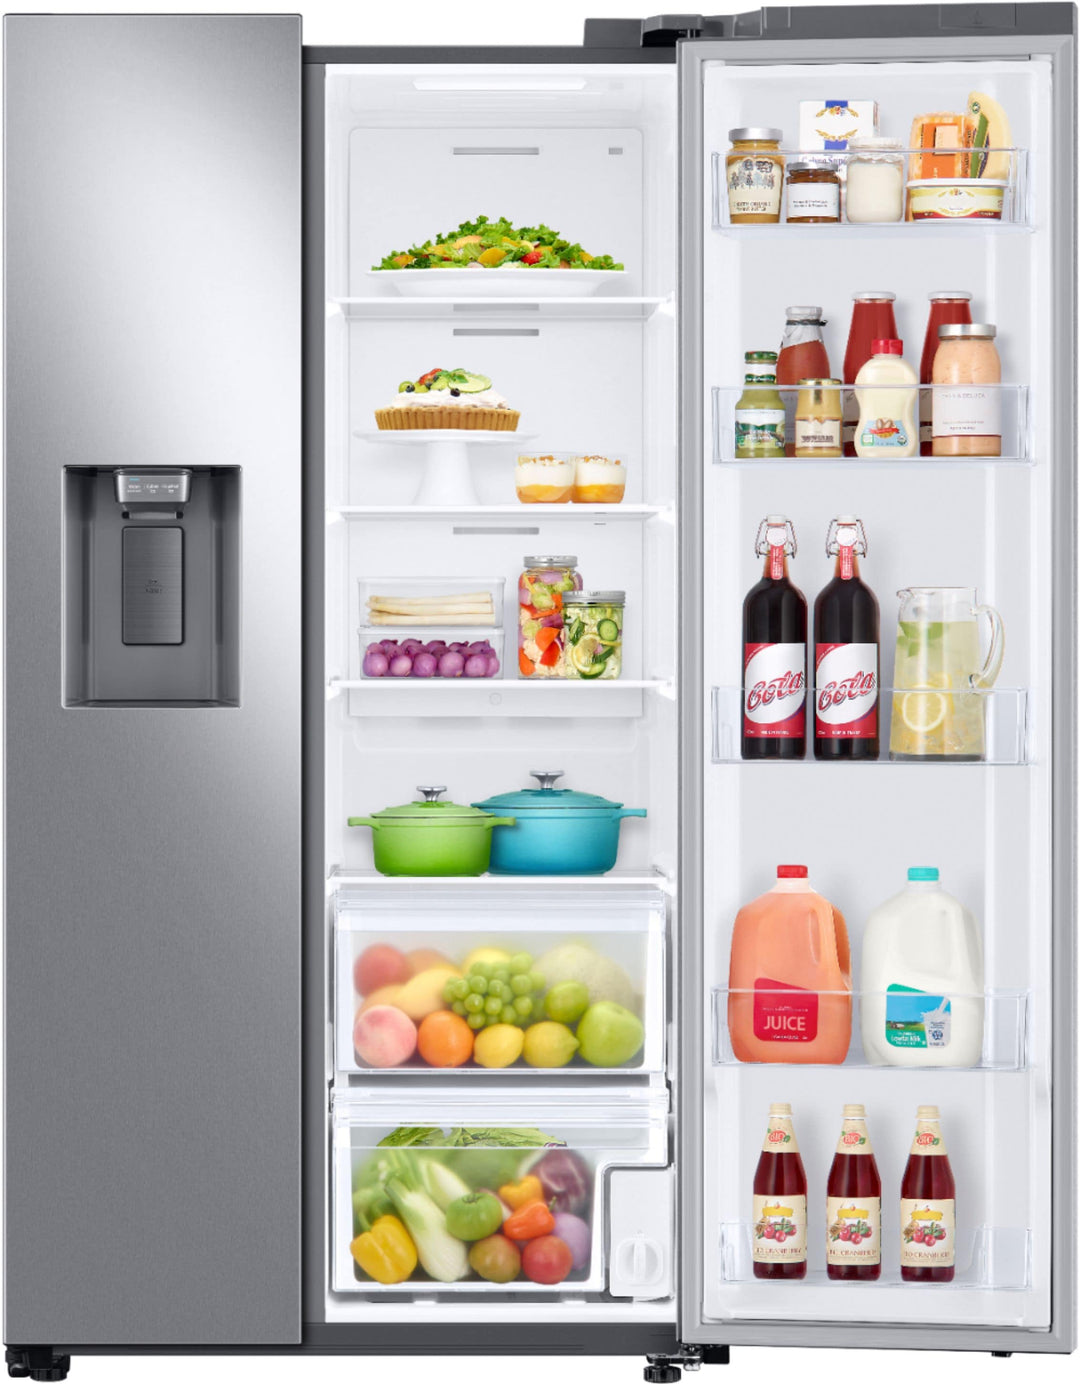 Samsung - 22 Cu. Ft. Side-by-Side Counter-Depth Refrigerator - Stainless steel_7